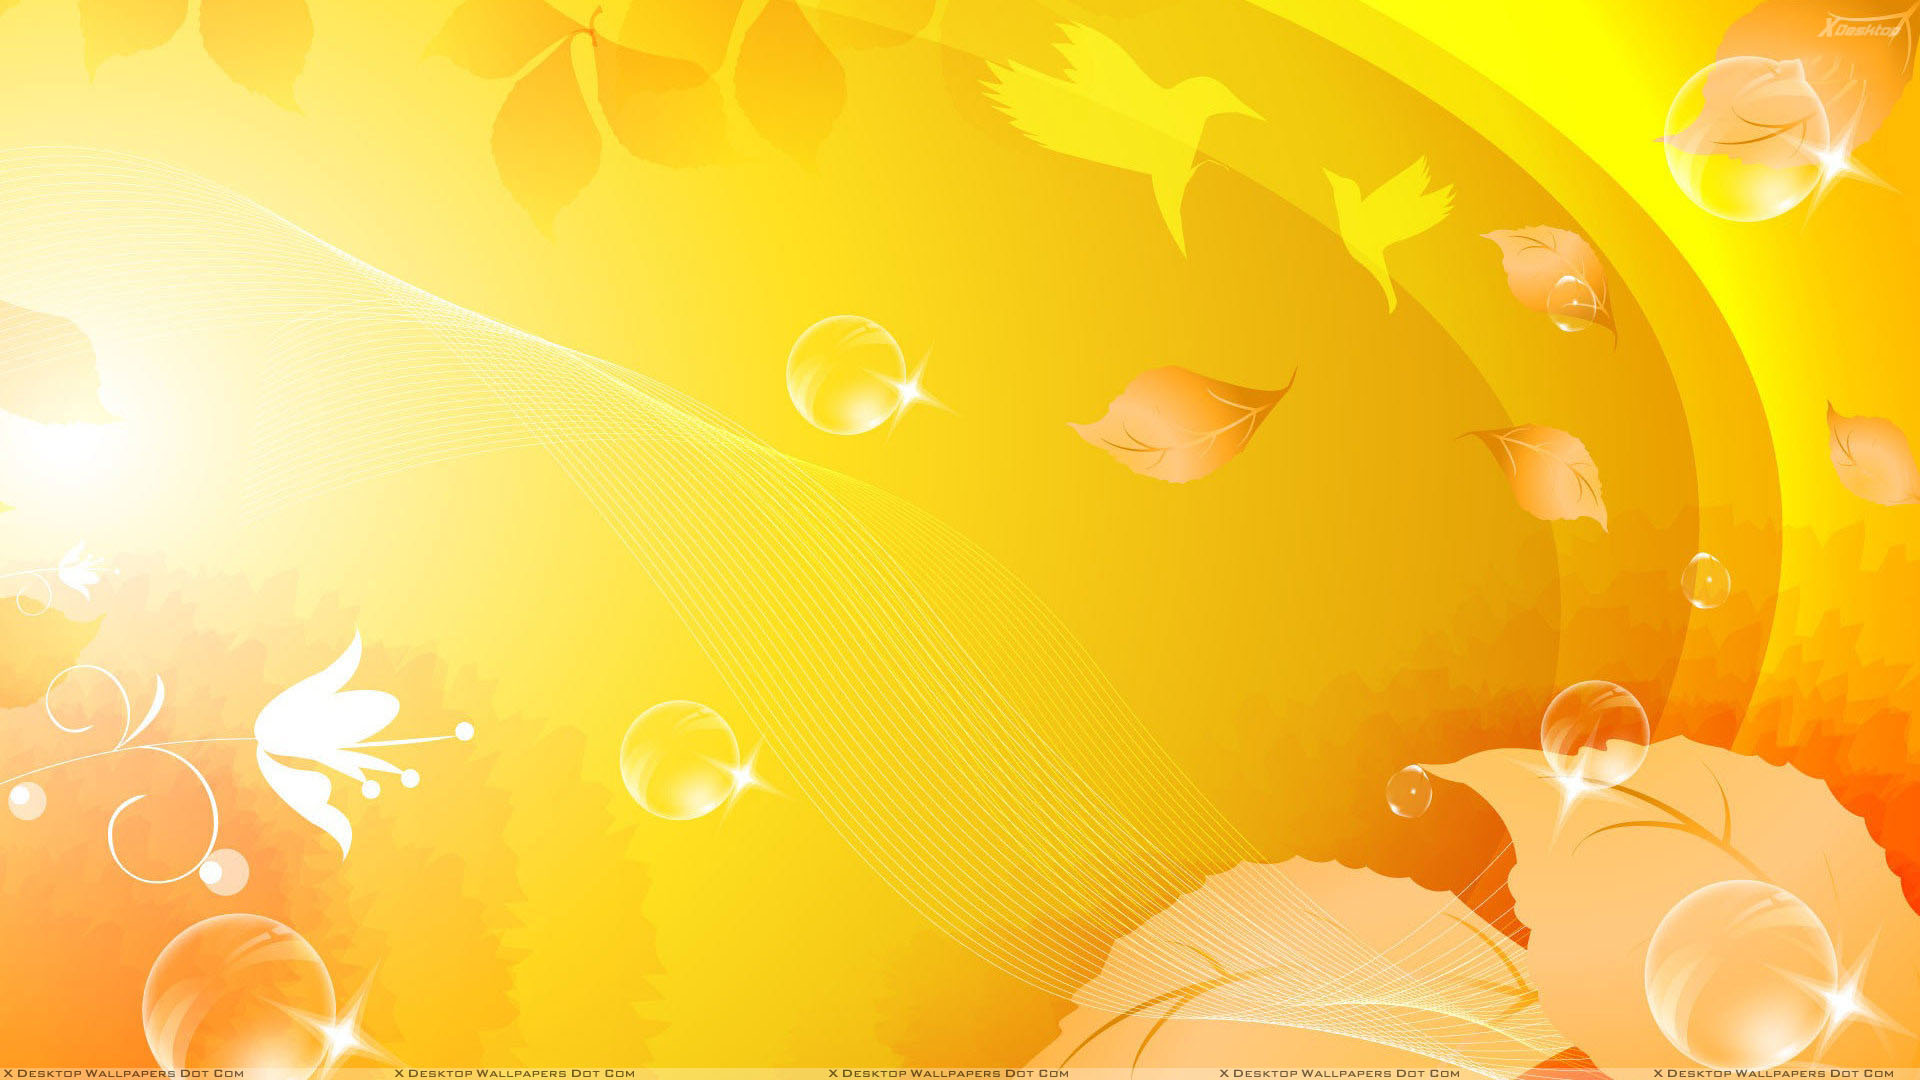  Yellow Wallpaper Sparknotes 14 High Resolution Wallpaper Full Size